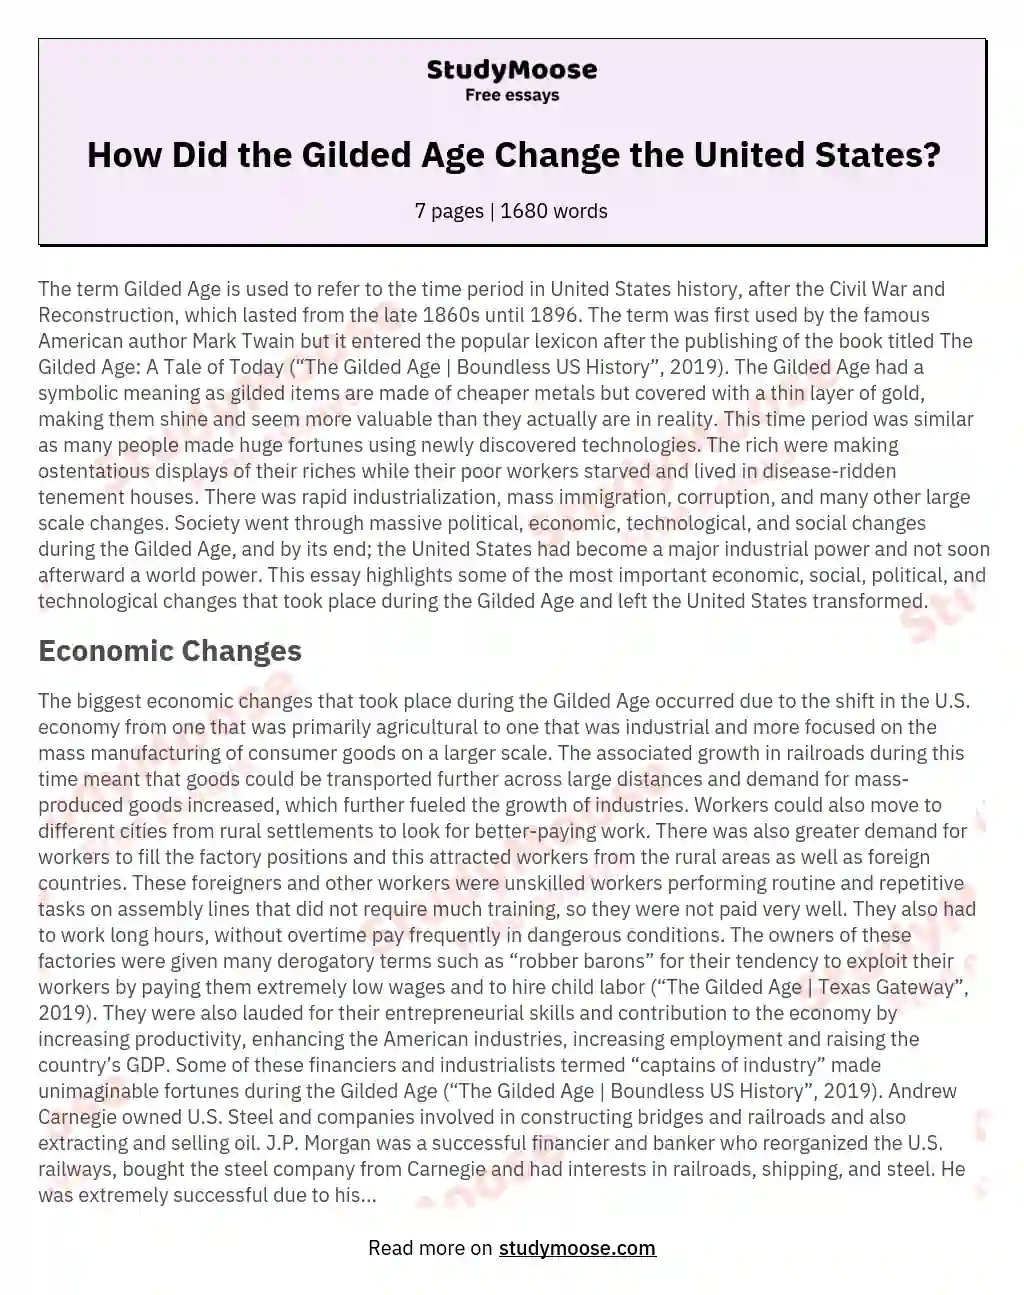 How Did the Gilded Age Change the United States? essay